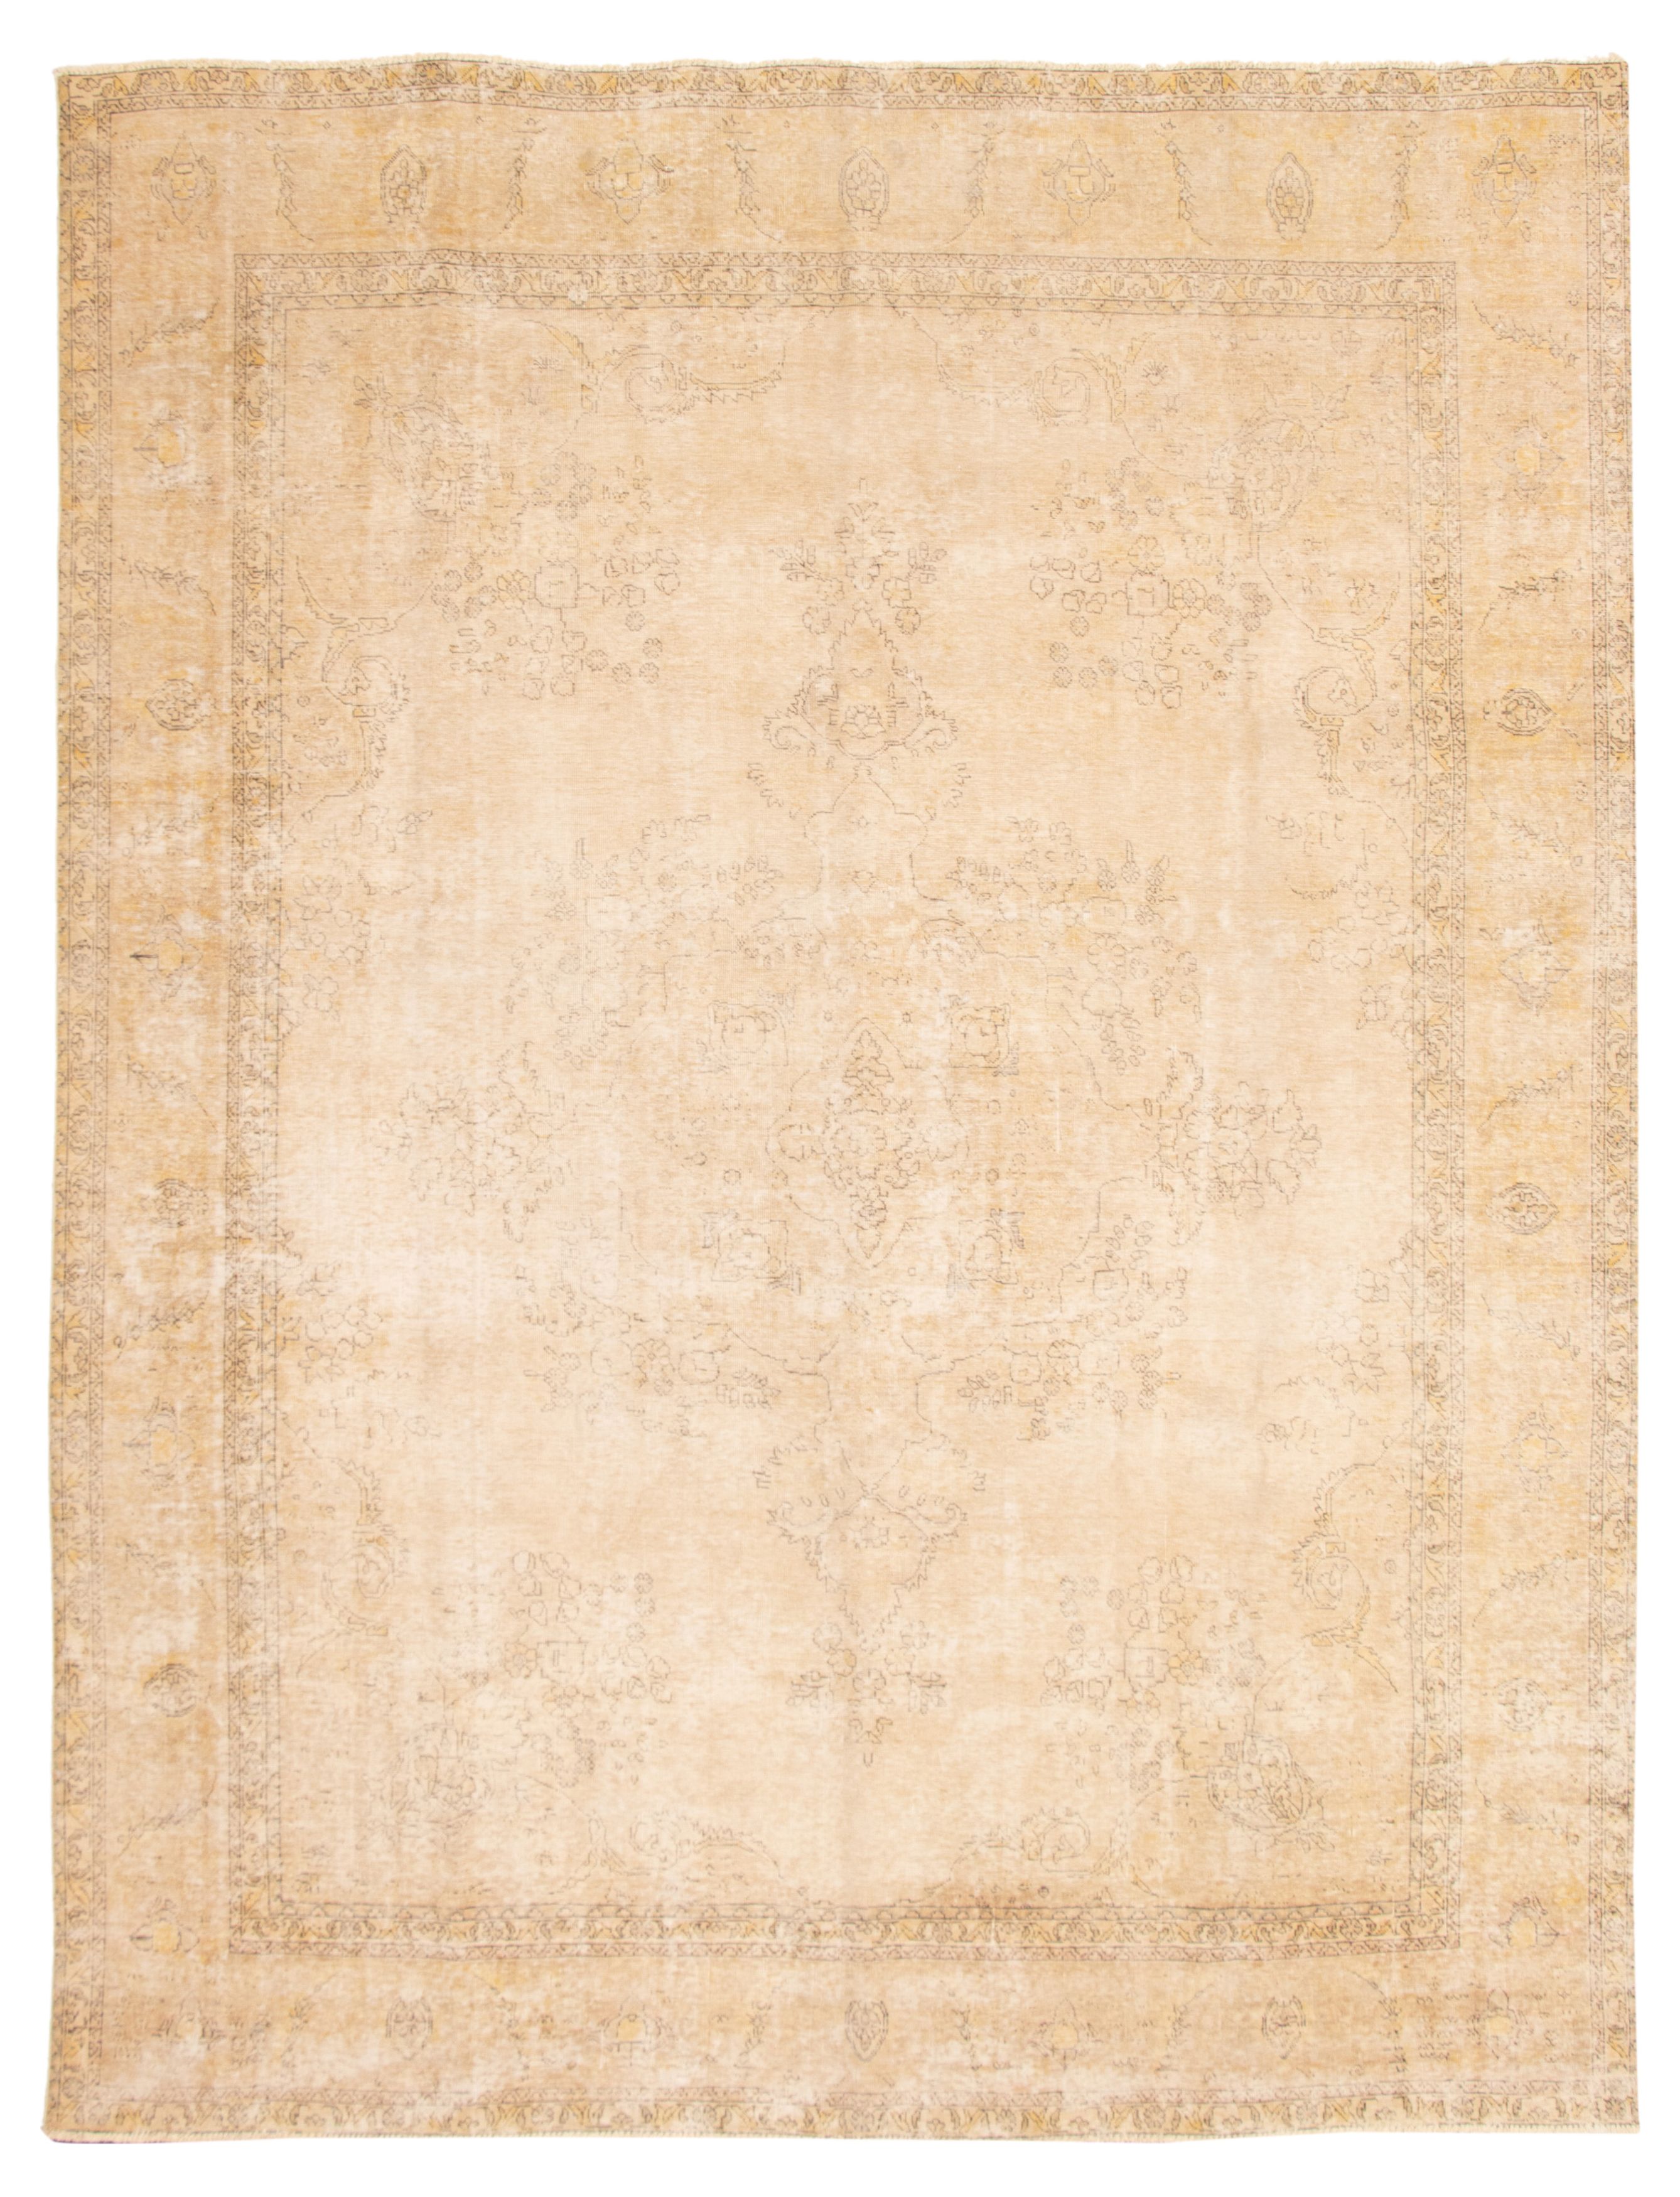 Hand-knotted Antalya Vintage Ivory Wool Rug 9'7" x 12'9" Size: 9'7" x 12'9"  